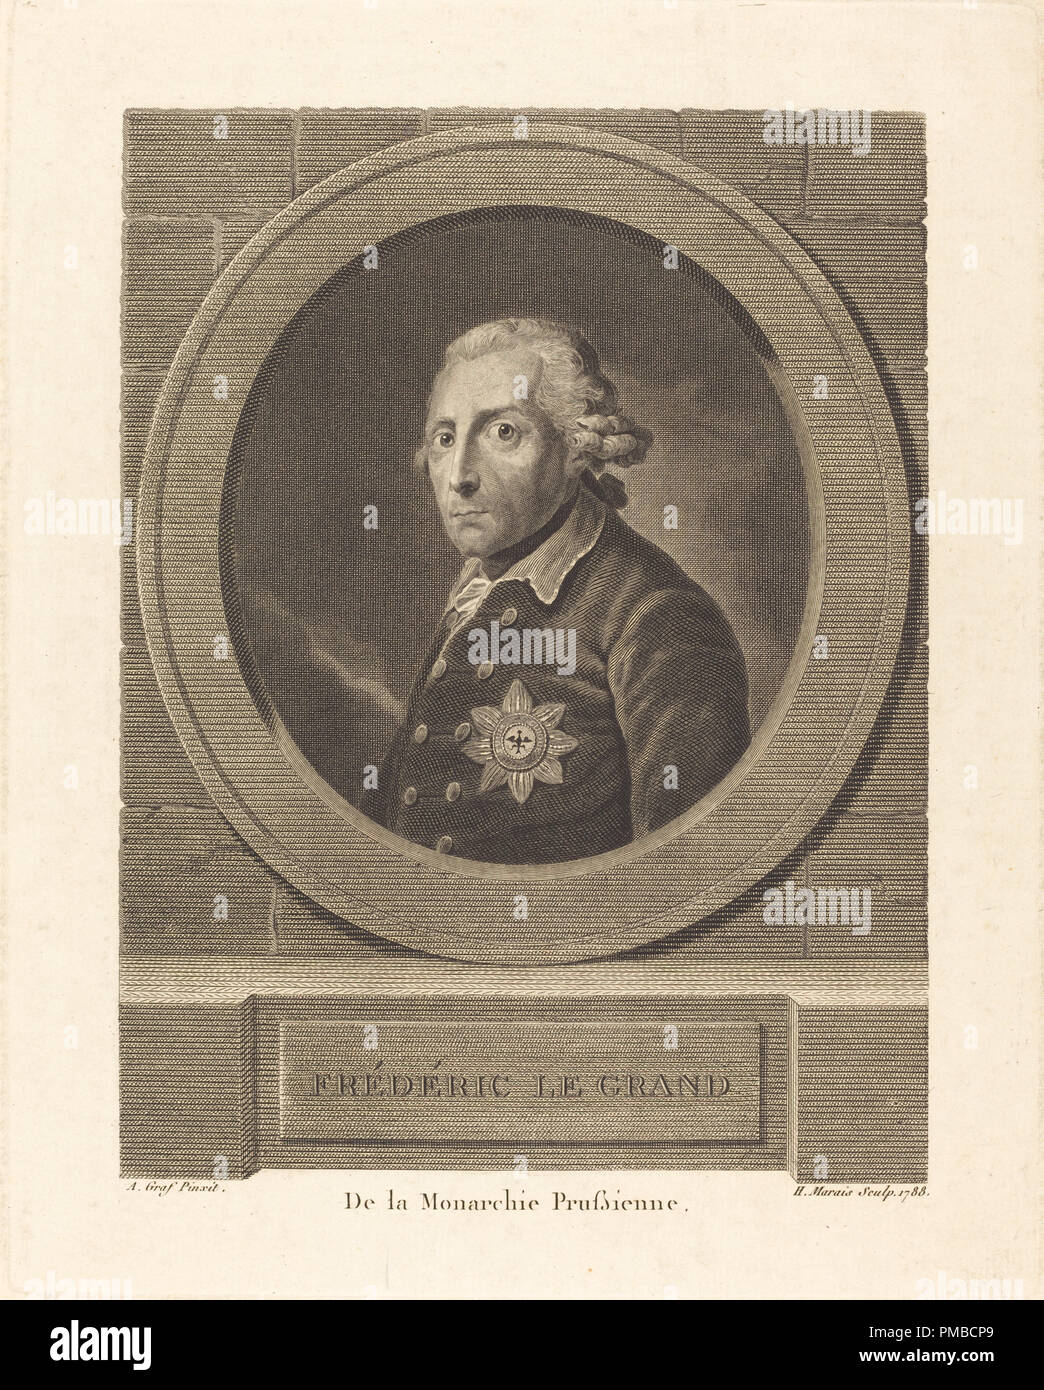 Frederick the Great, King of Prussia. Dated: 1788. Dimensions: plate: 26 x 20.6 cm (10 1/4 x 8 1/8 in.)  sheet: 29.4 x 22.2 cm (11 9/16 x 8 3/4 in.). Medium: engraving on laid paper. Museum: National Gallery of Art, Washington DC. Author: Henri Marais after Anton Graff. Stock Photo